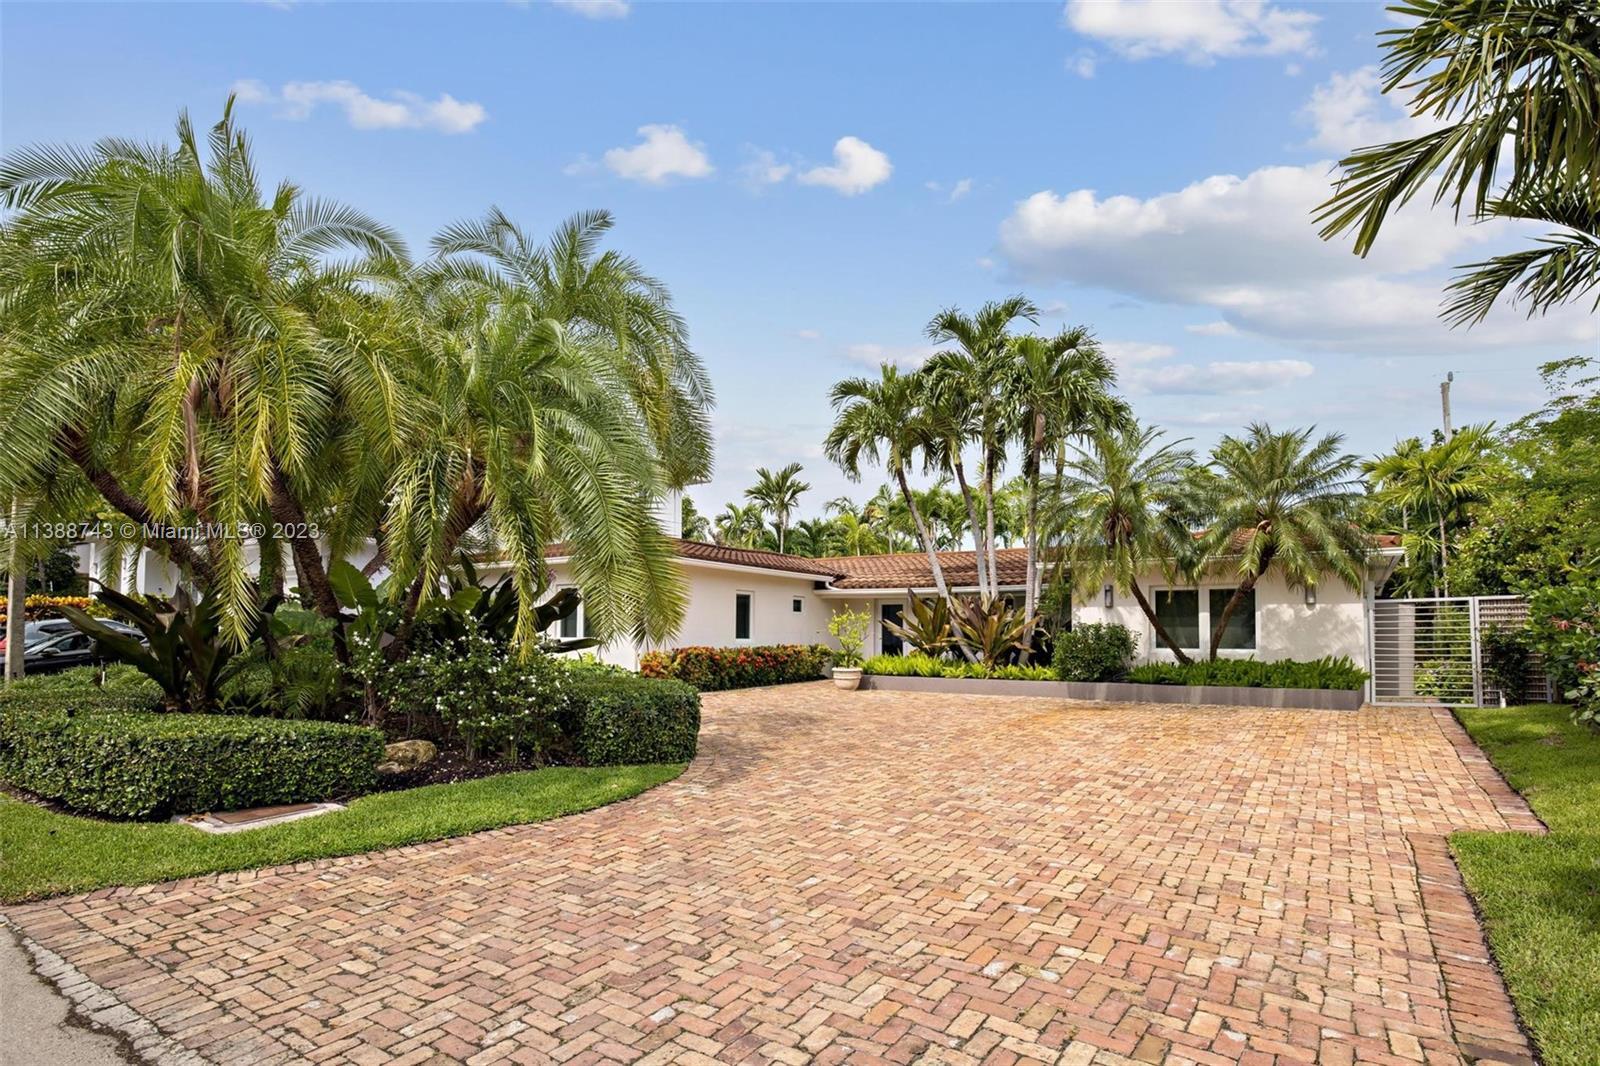 Welcome to this exceptional residence located in the prestigious Key Biscayne community. This magnif